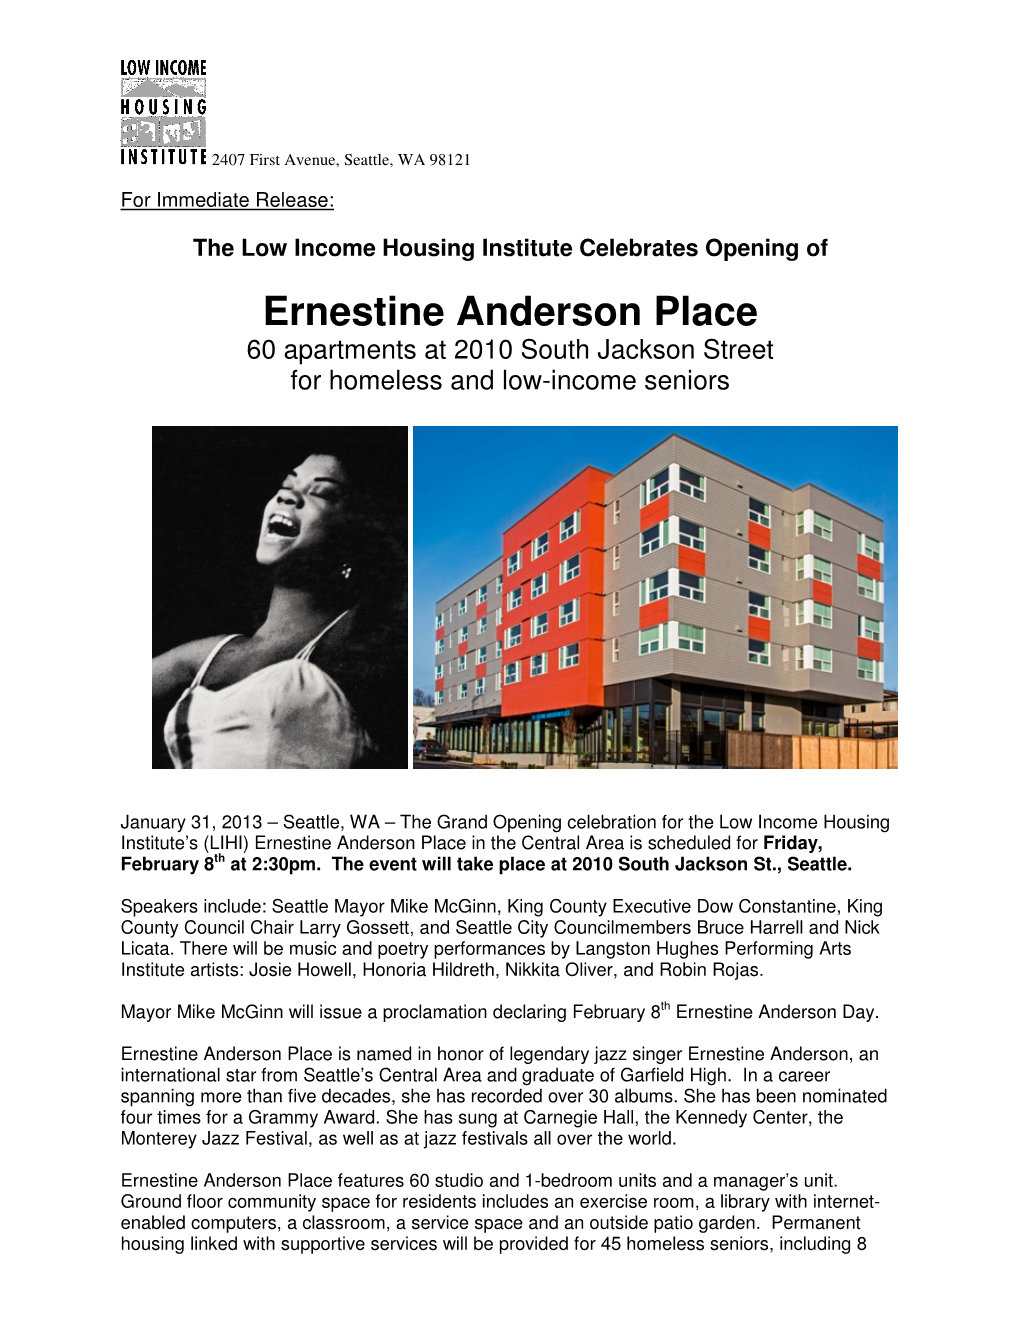 Ernestine Anderson Place 60 Apartments at 2010 South Jackson Street for Homeless and Low-Income Seniors